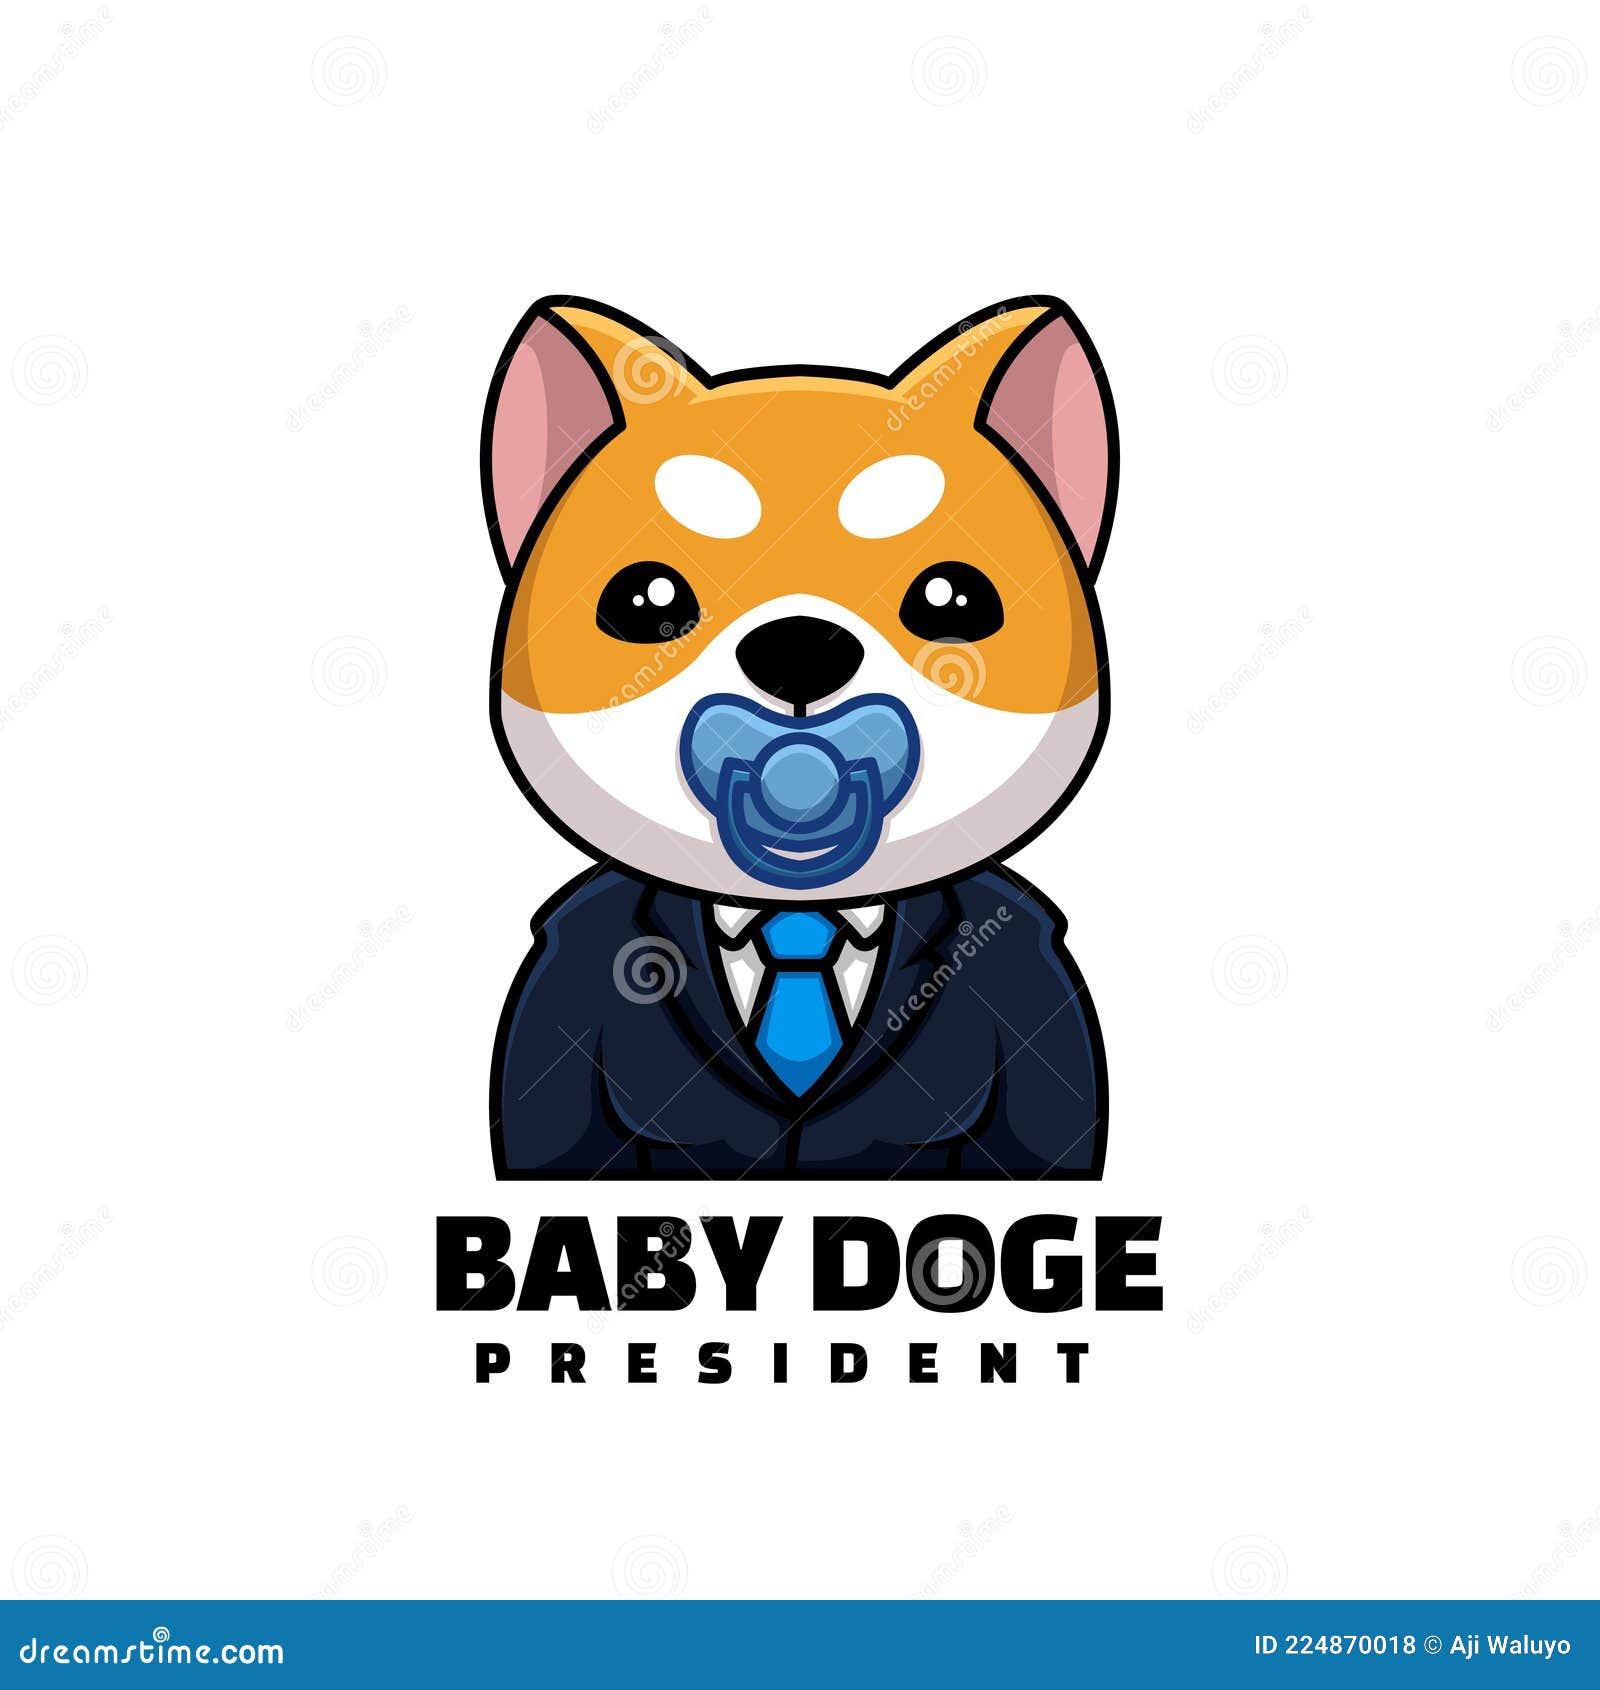 Doge coin baby If you